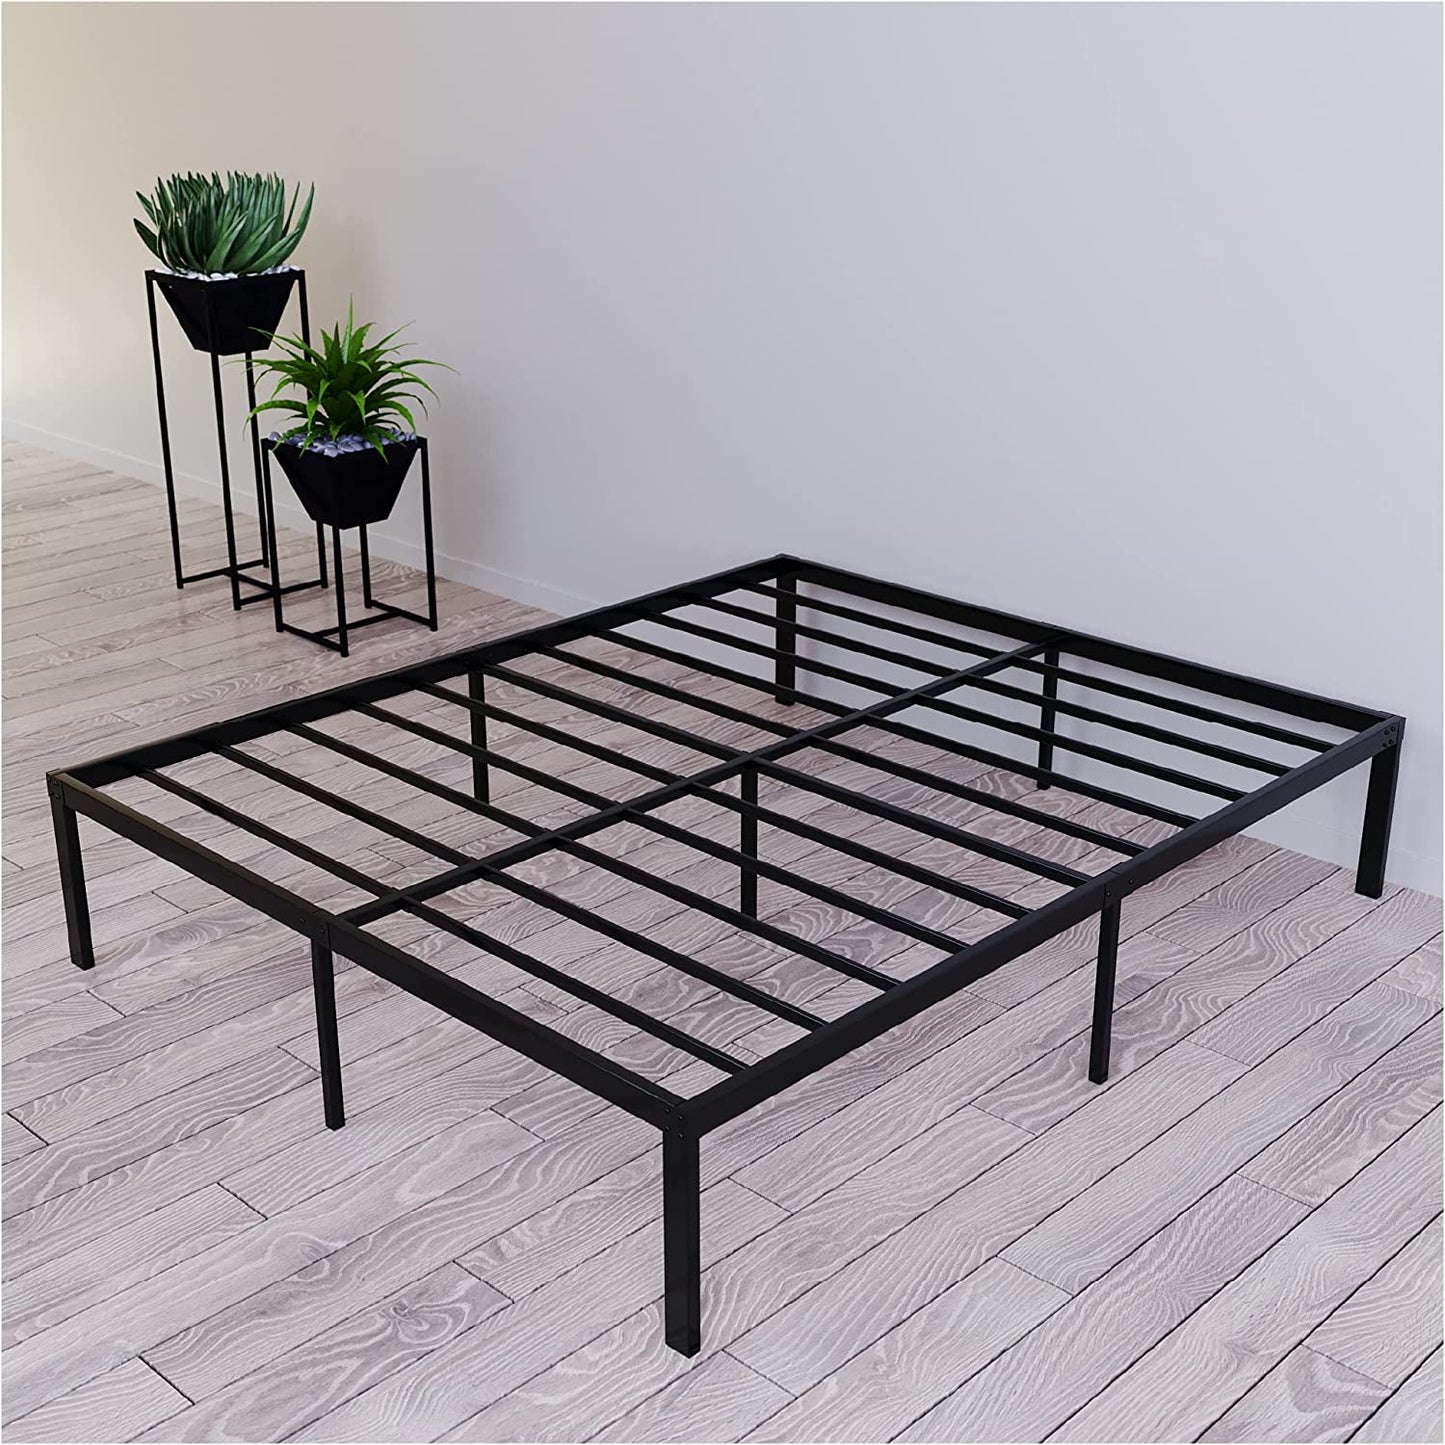 Metal Base for Bed - for Mattress 135X200 Cm - for Double Beds or Mattresses - Sturdy, Easy Assembly, Large Storage Area - Black Bed Frame